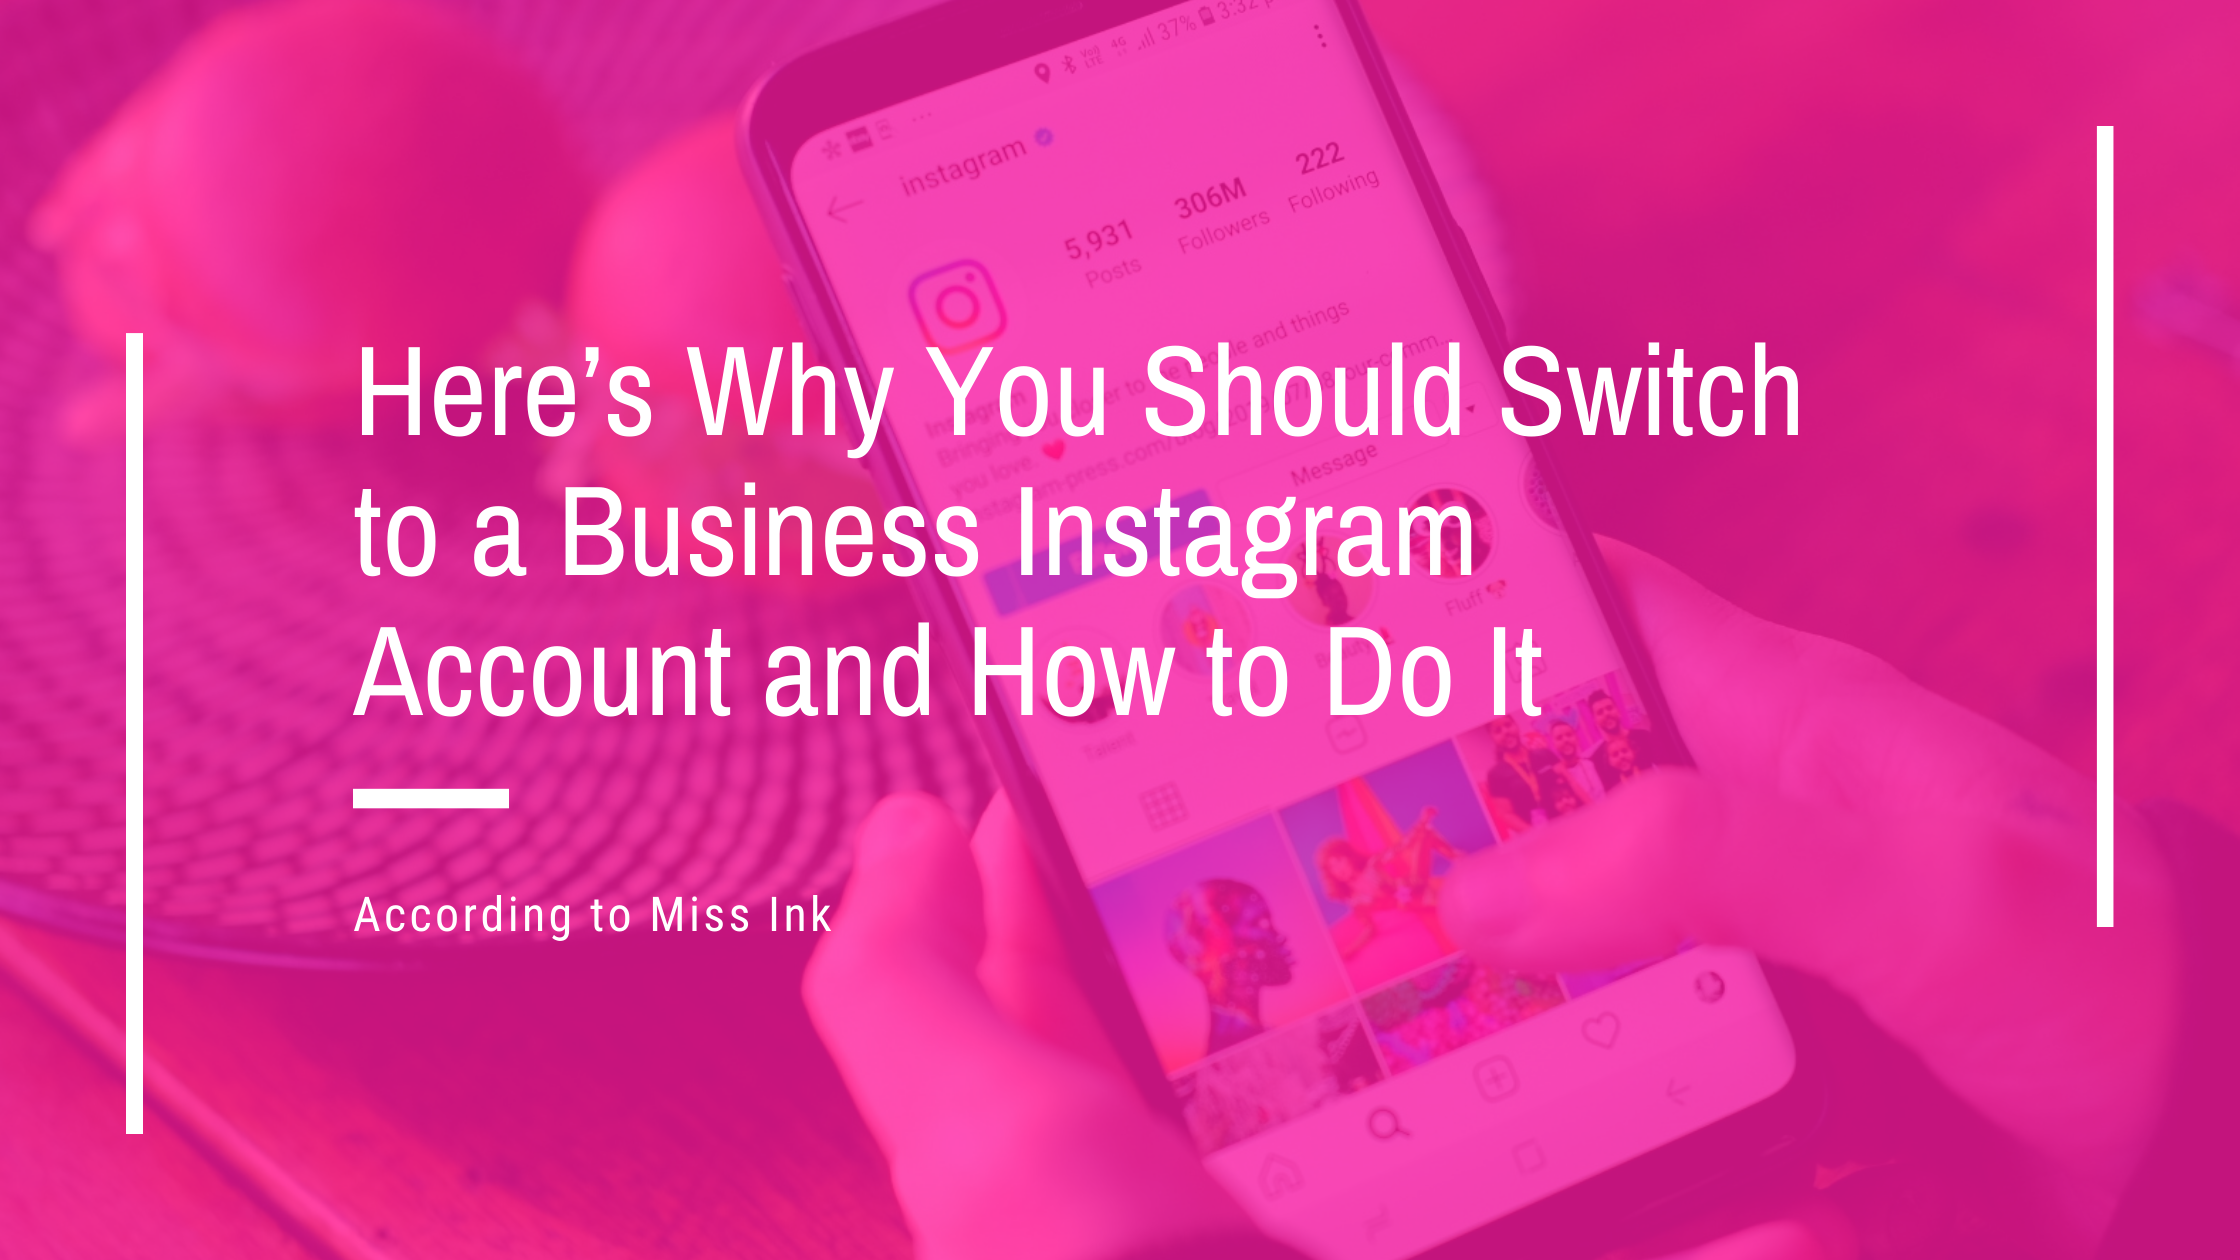 Here’s Why You Should Switch to a Business Instagram Account and How to Do It